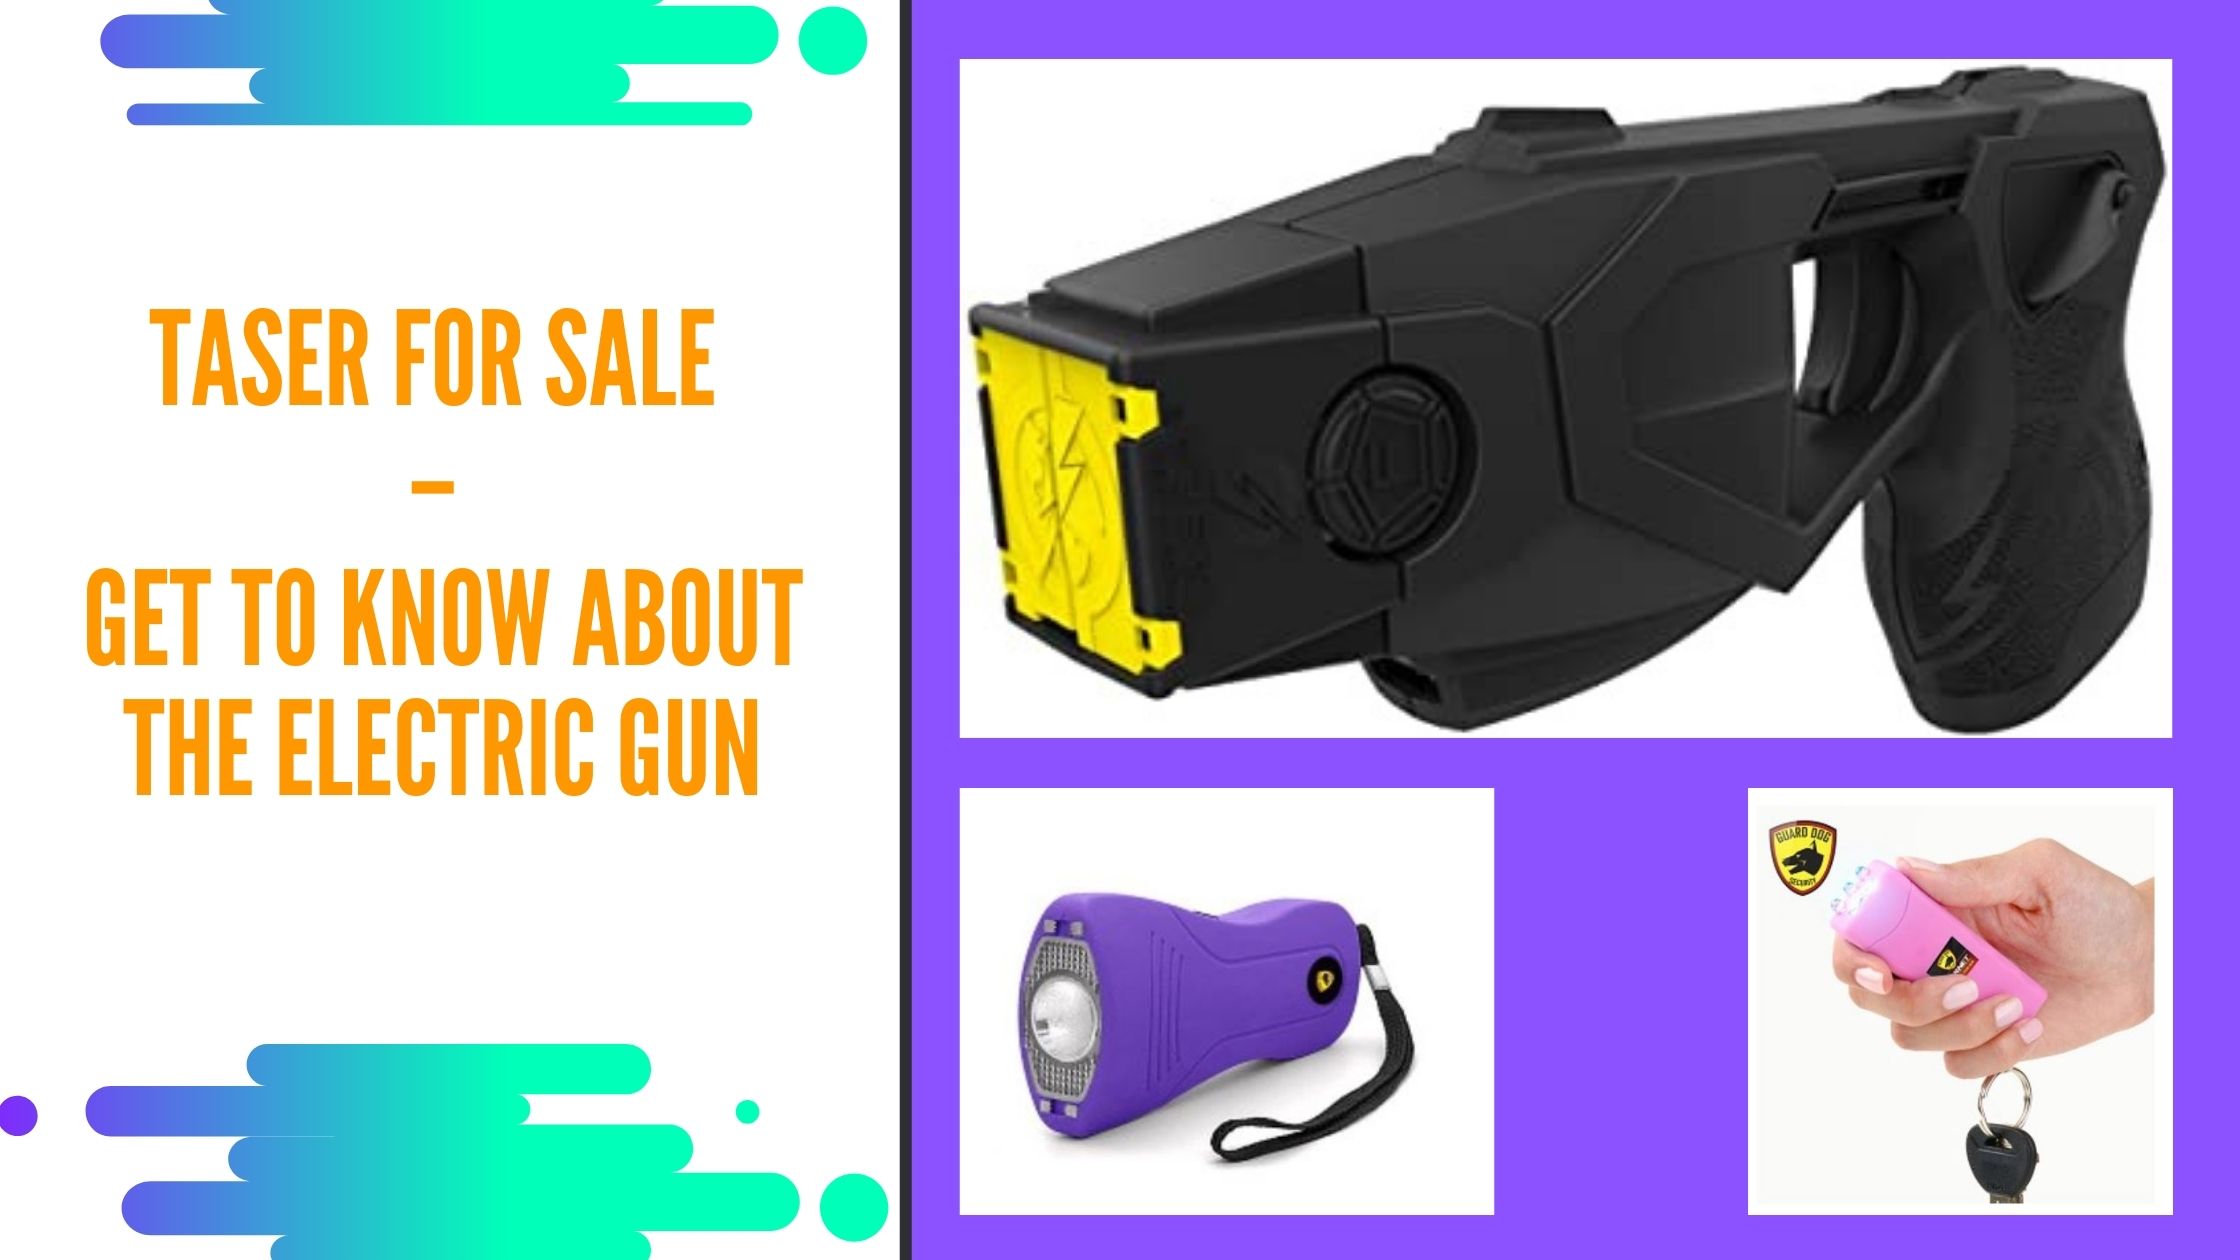 Taser for Sale Get to Know About the Electric Gun